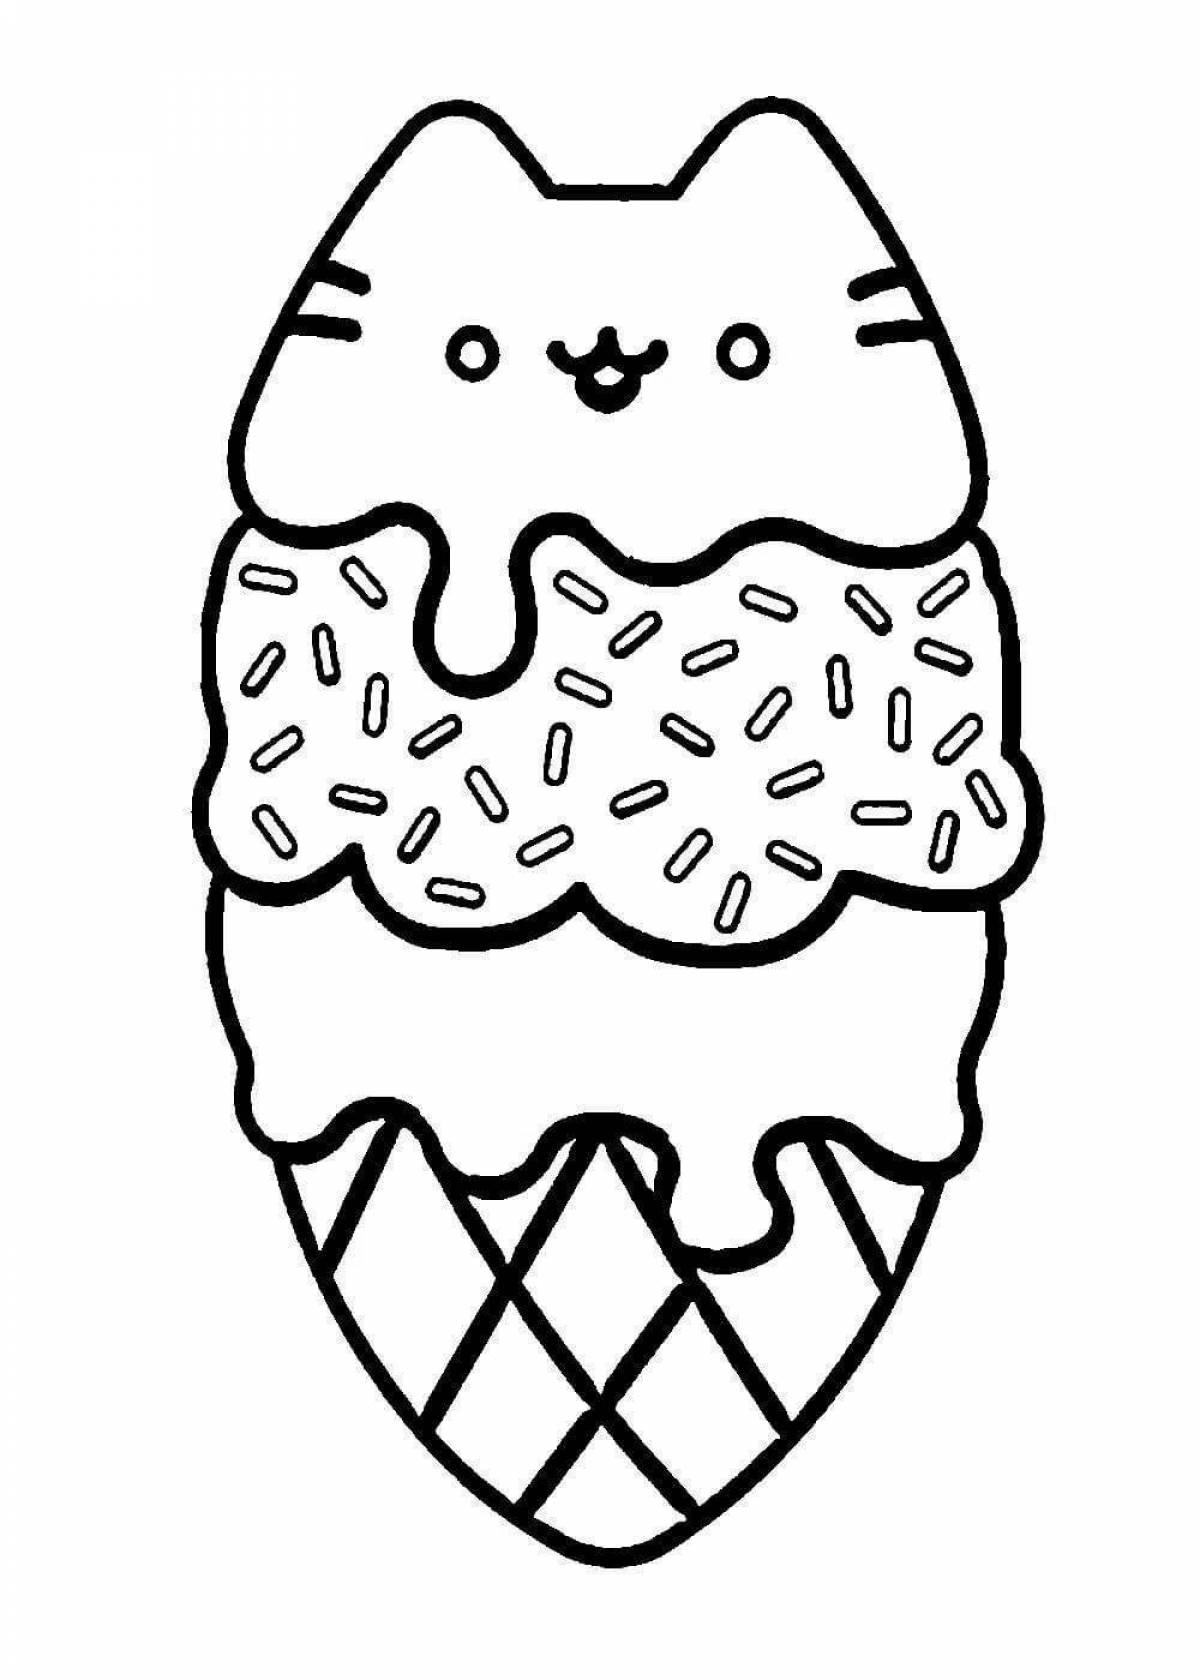 Bright coloring page